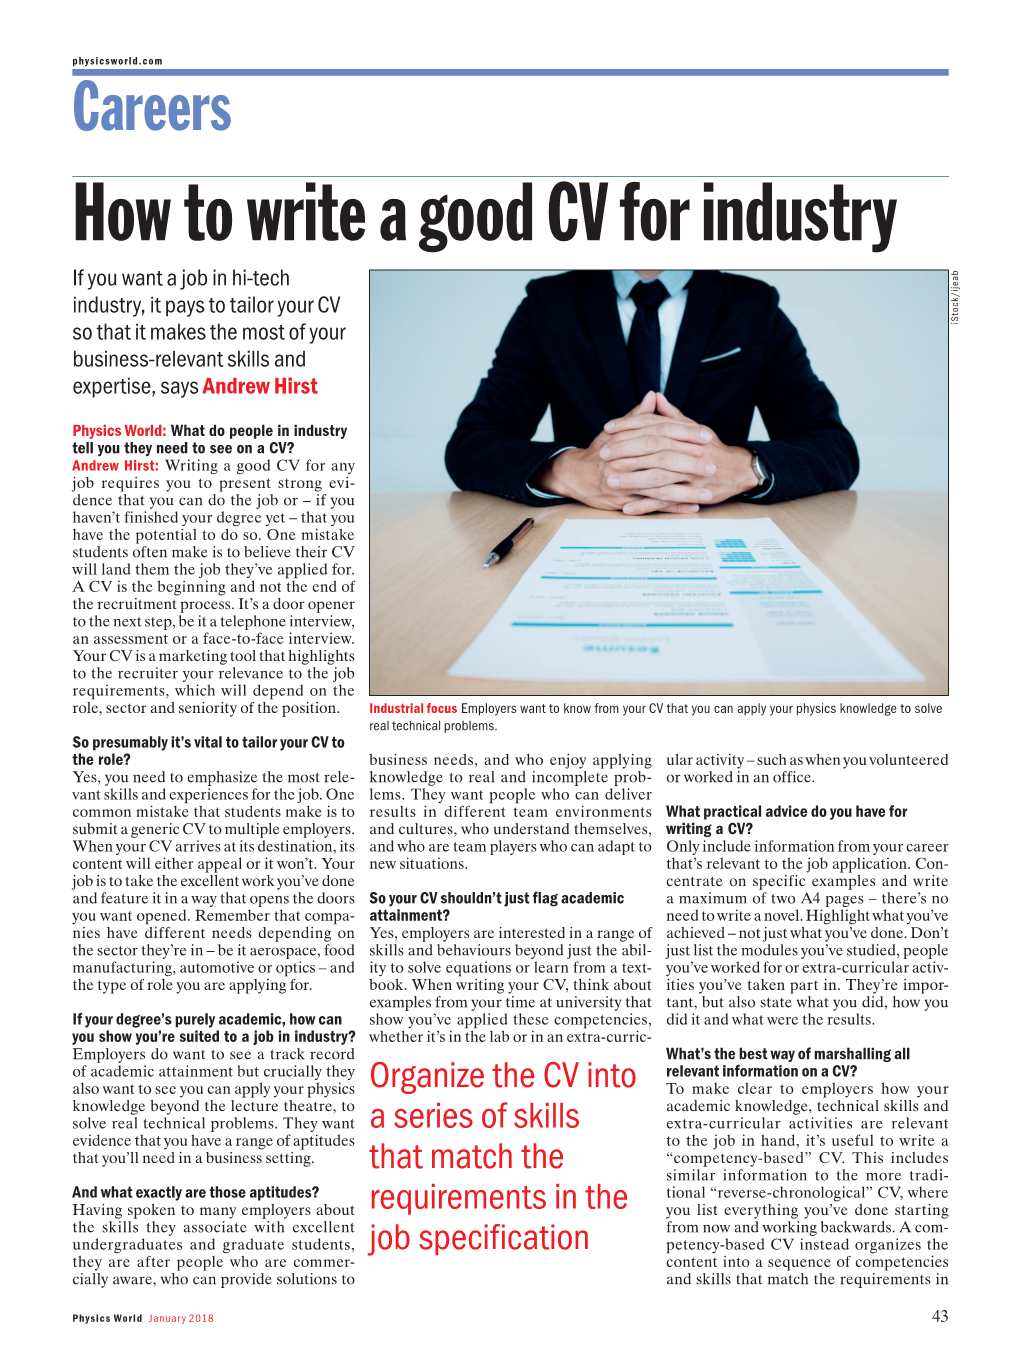 How to Write a Good CV for Industry (PDF , 410Kb)